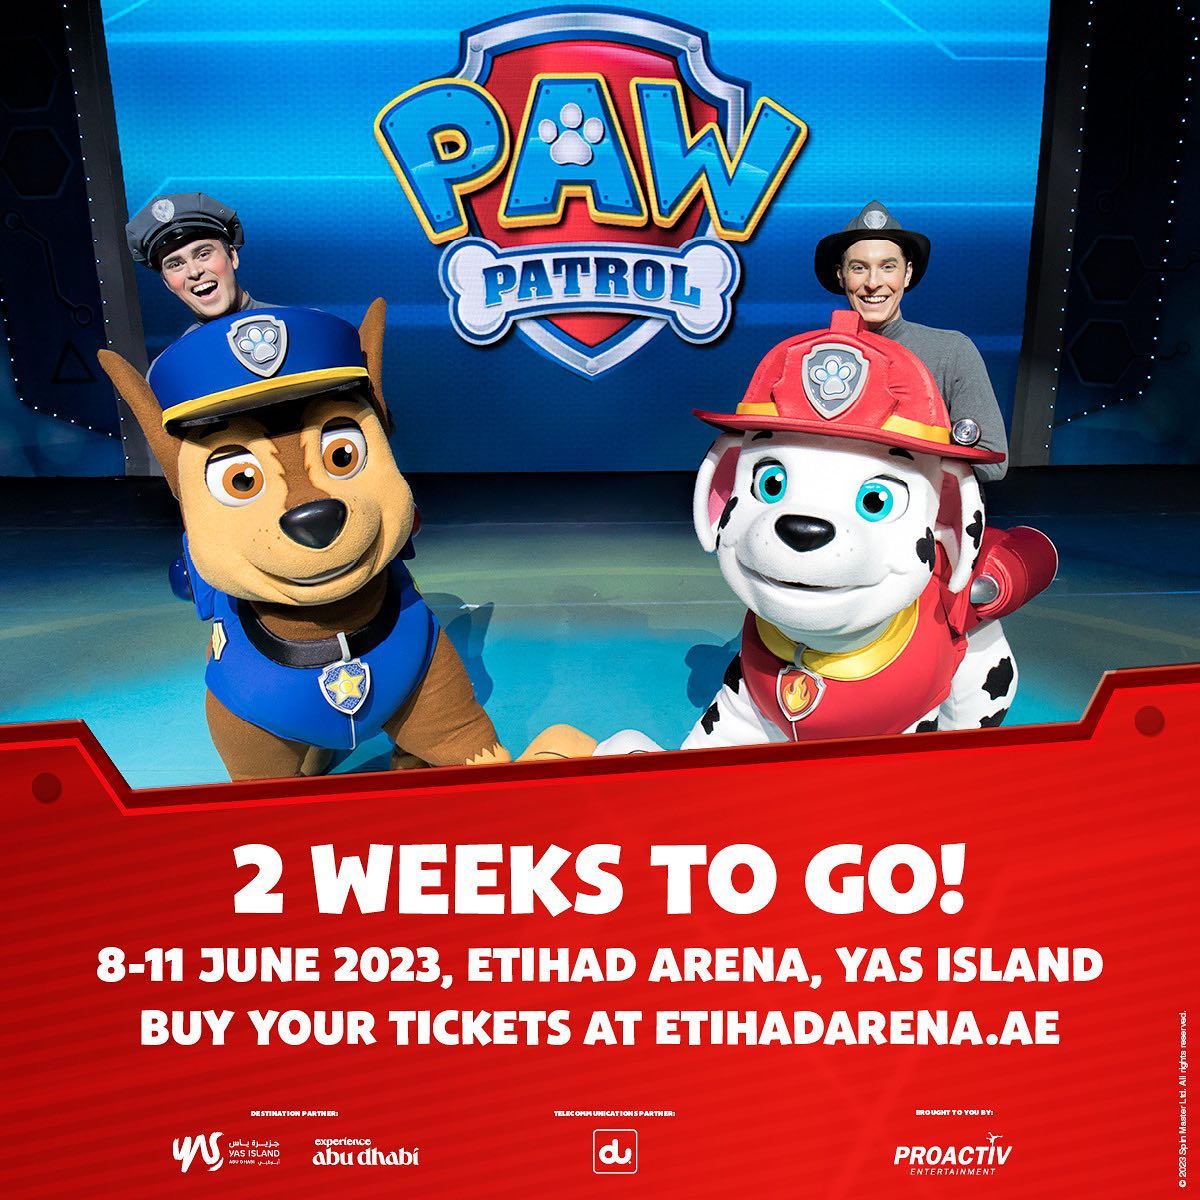 2 weeks only until the heroic pups take the Etihad Arena stage!

Are you ready for the PAW-tastic mission 8-11 June?

Book your tickets now at etihadarena.ae

#EtihadArena #RediscoverEntertainment #RediscoverAD #ExperienceExtraordinary

@inabudhabi @yasisland @yasbayuae